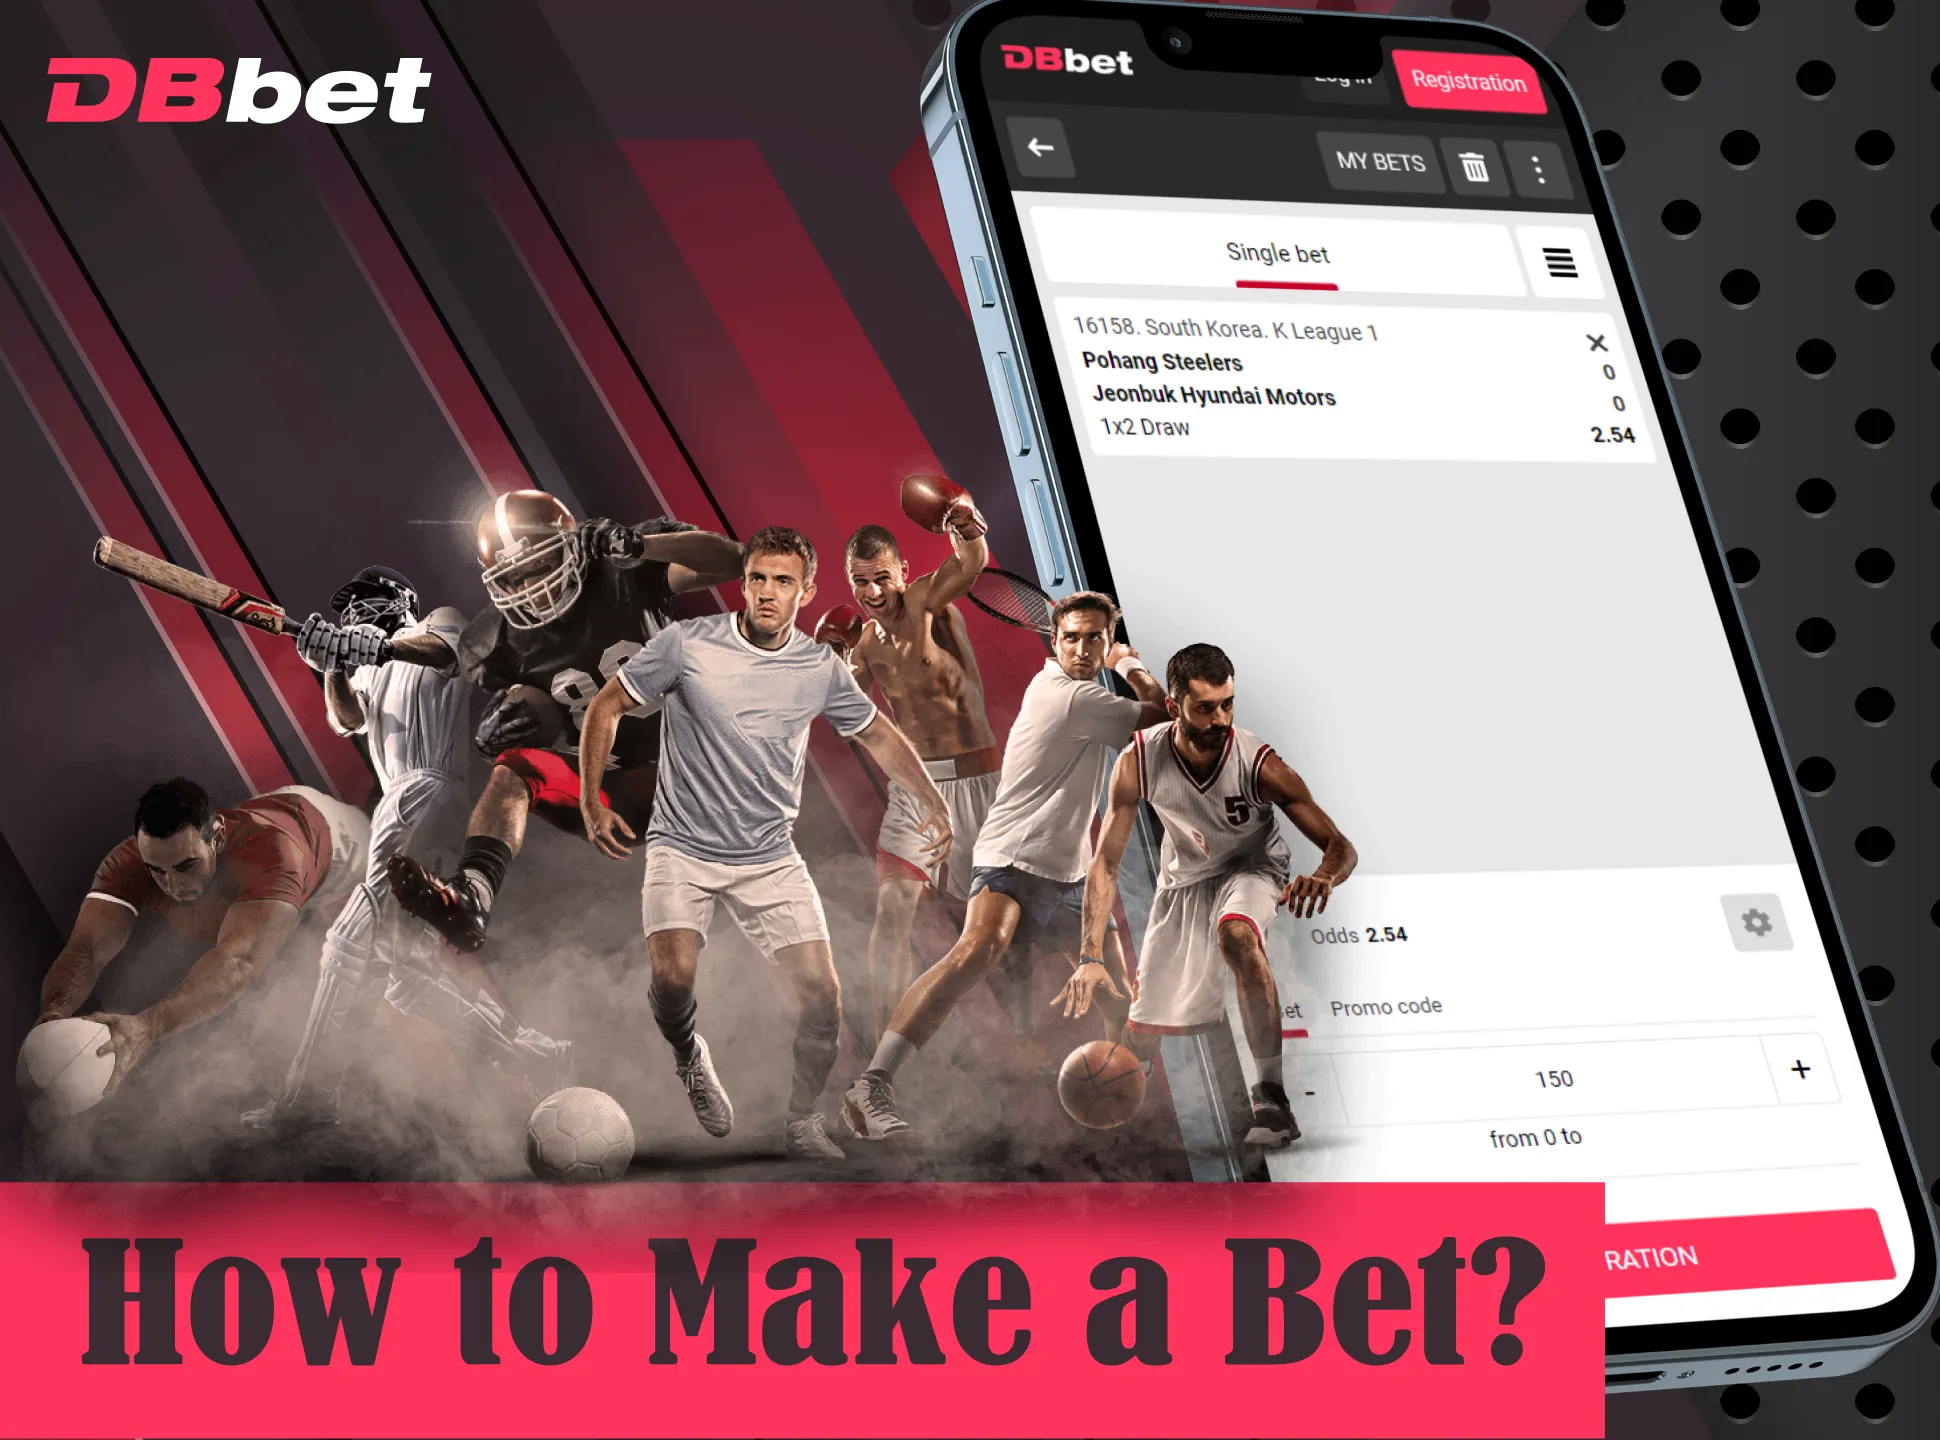 Make bet in app on special DBbet page.